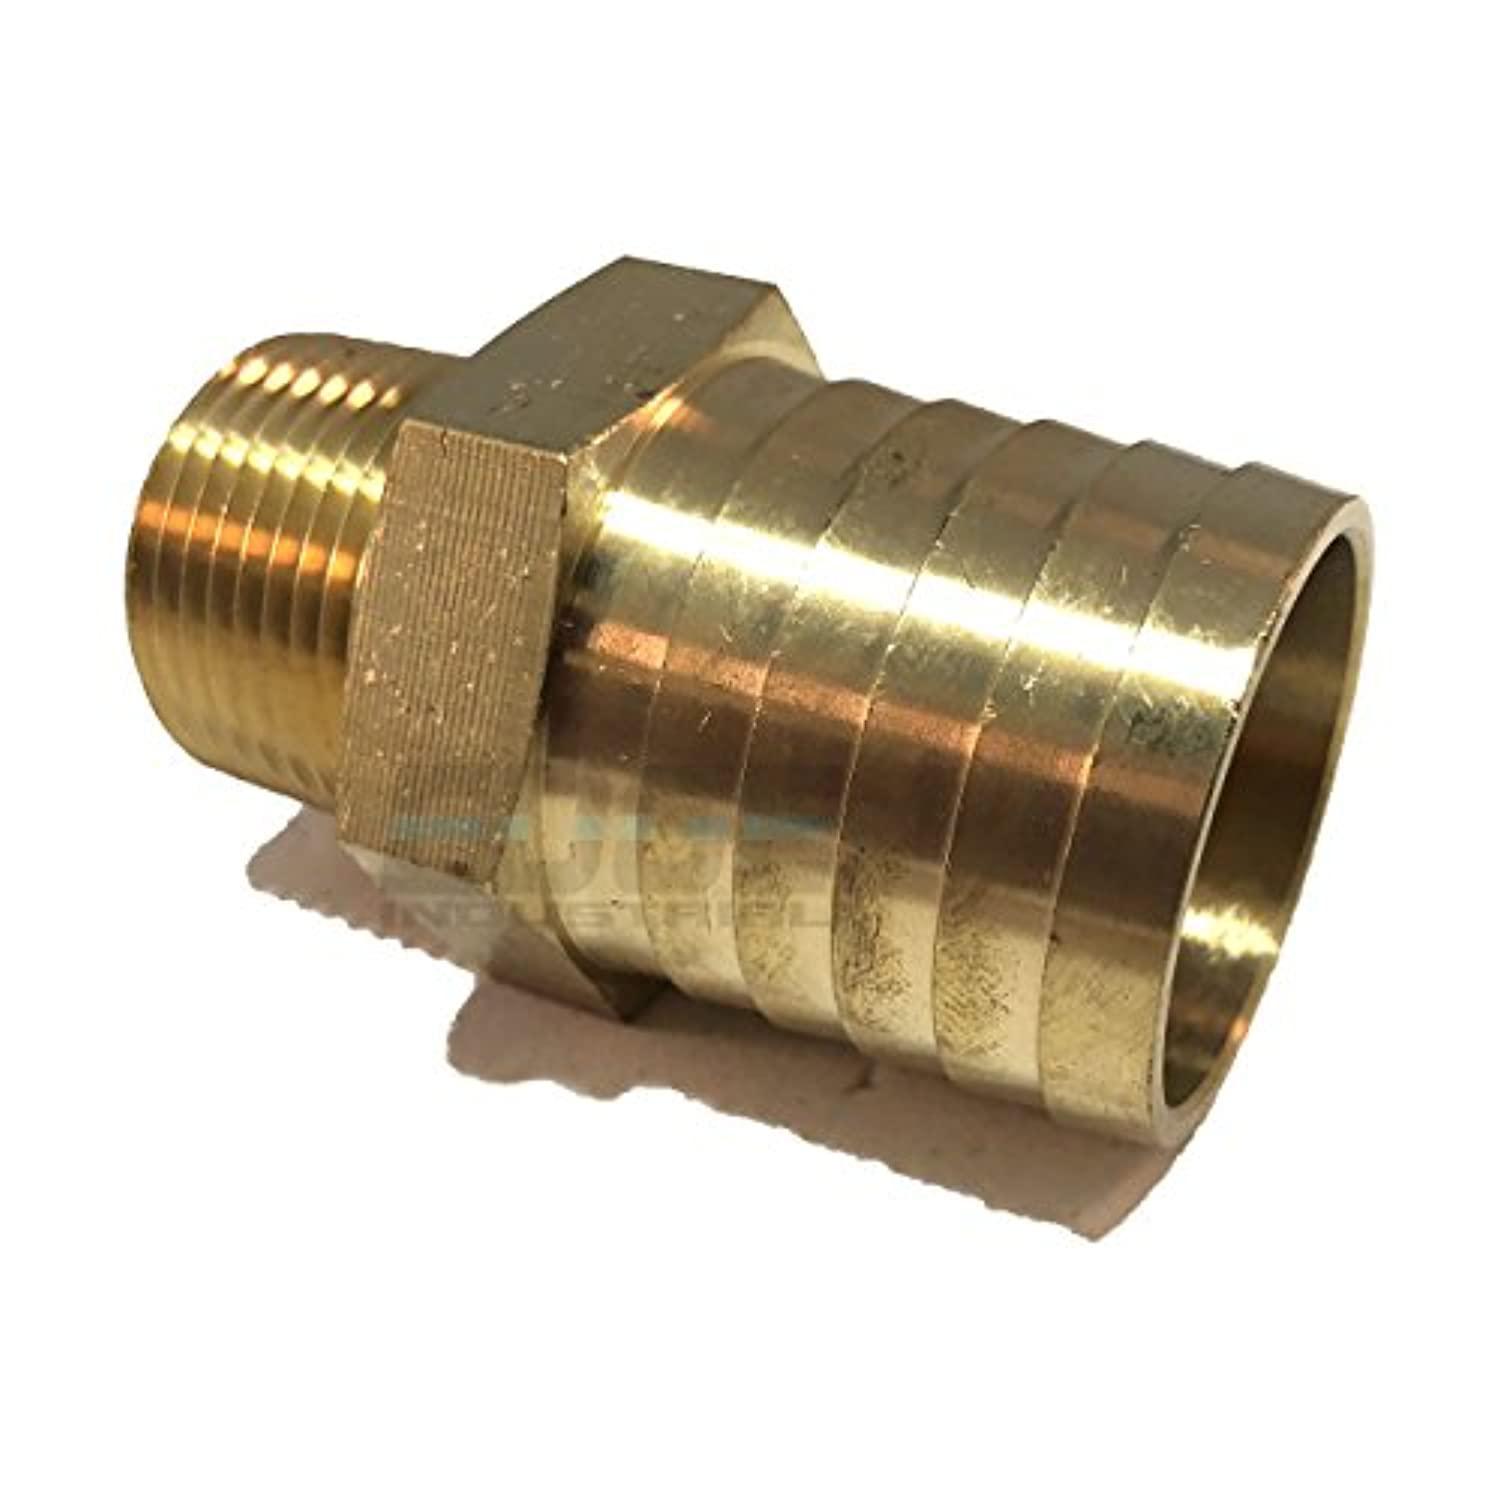 edge industrial 1-1/4" hose id to 3/4" male npt mnpt straight brass fitting fuel / air / water / oil / gas / wog (qty 1)